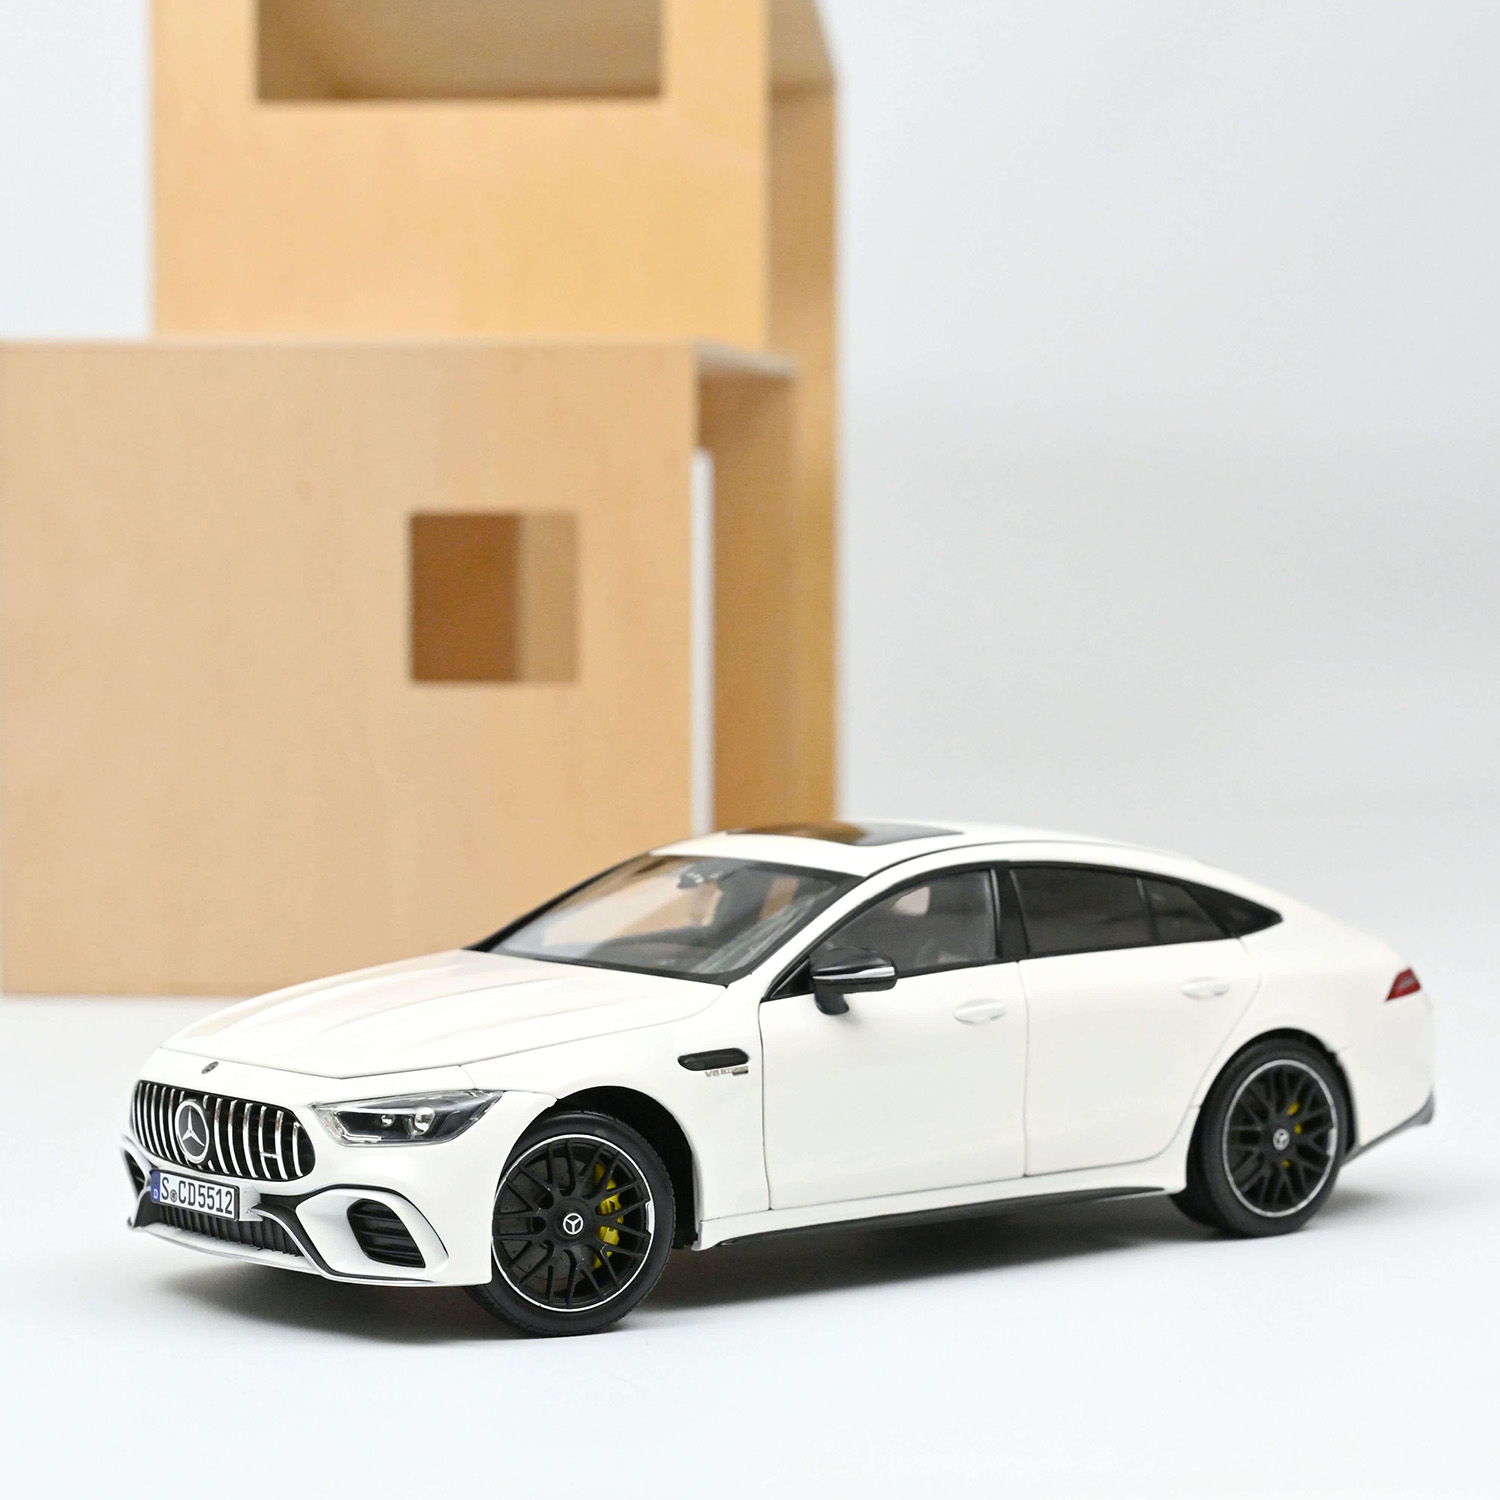 Norev 183445 Mercedes-AMG GT S 4-Matic 2019 - White 1:18